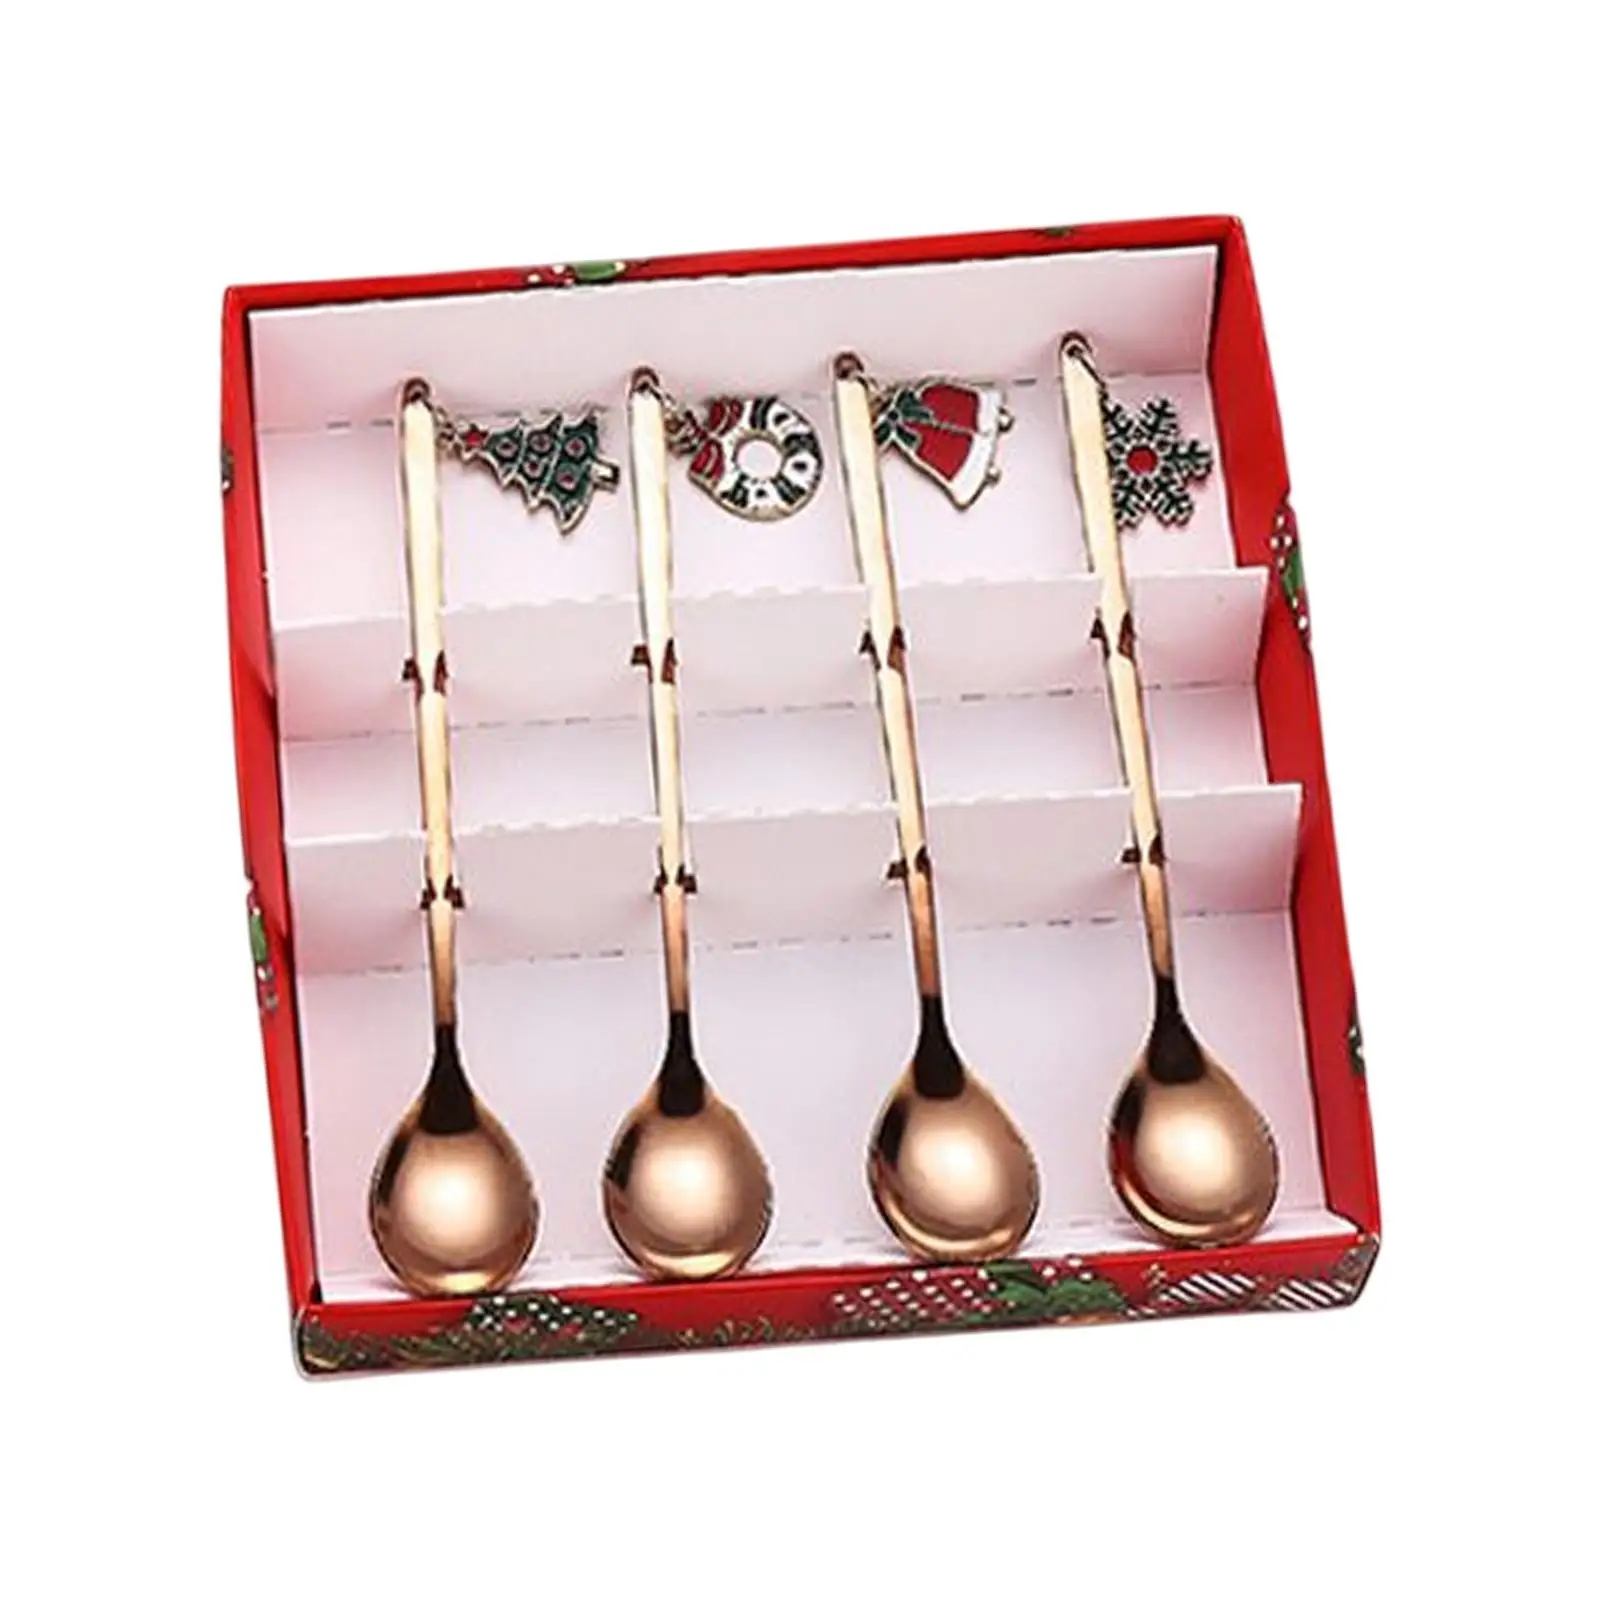 4 Pieces Creative Christmas Coffee Spoon Home Party Ornament Dinnerware Mixing